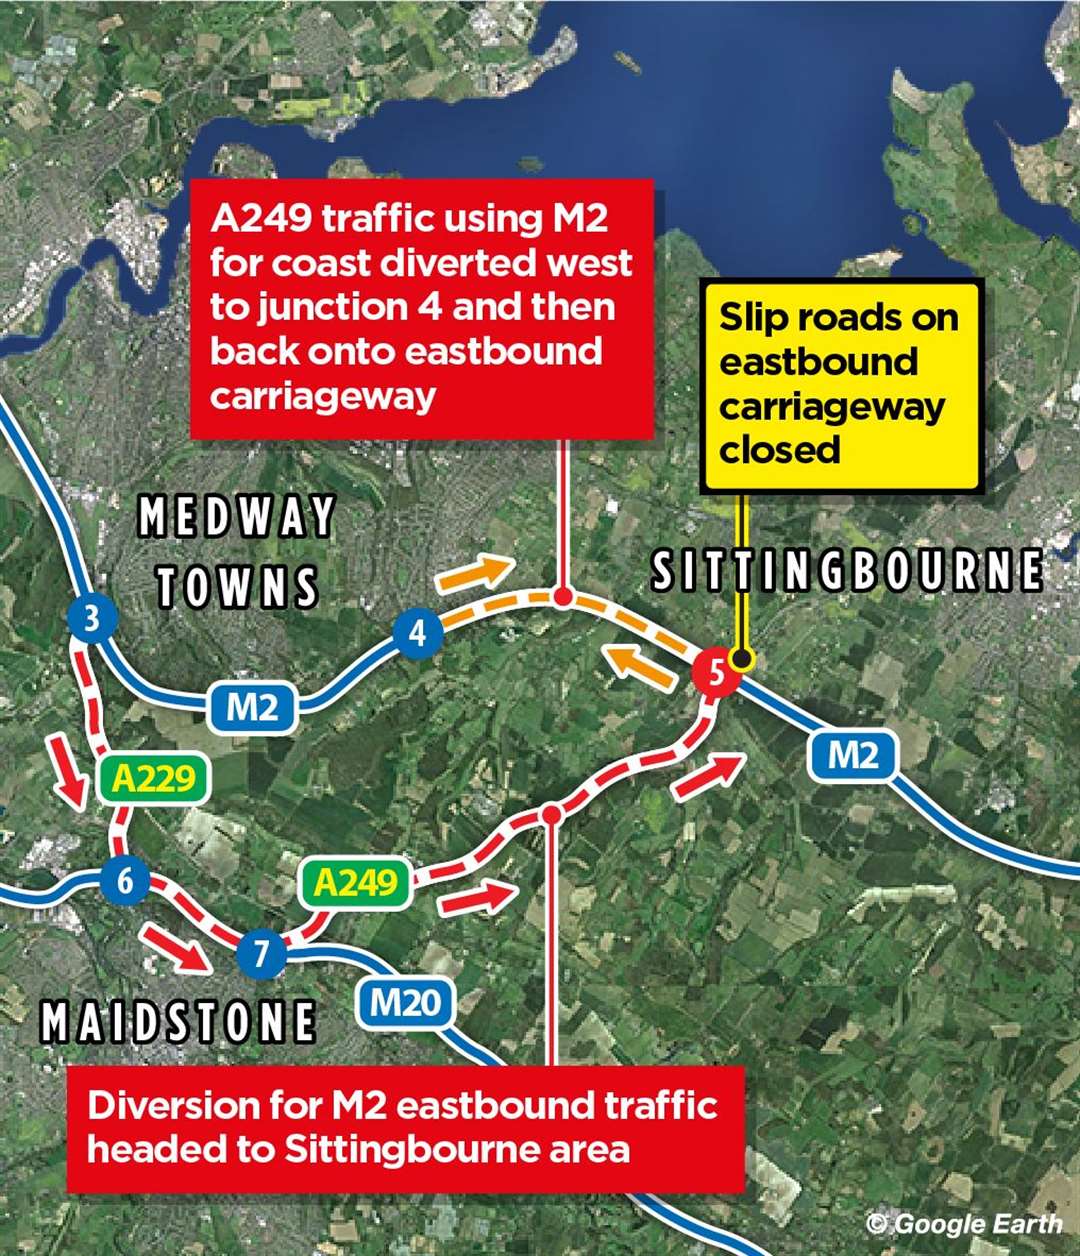 The M2 diversion route is sending drivers into further closures on Blue Bell Hill